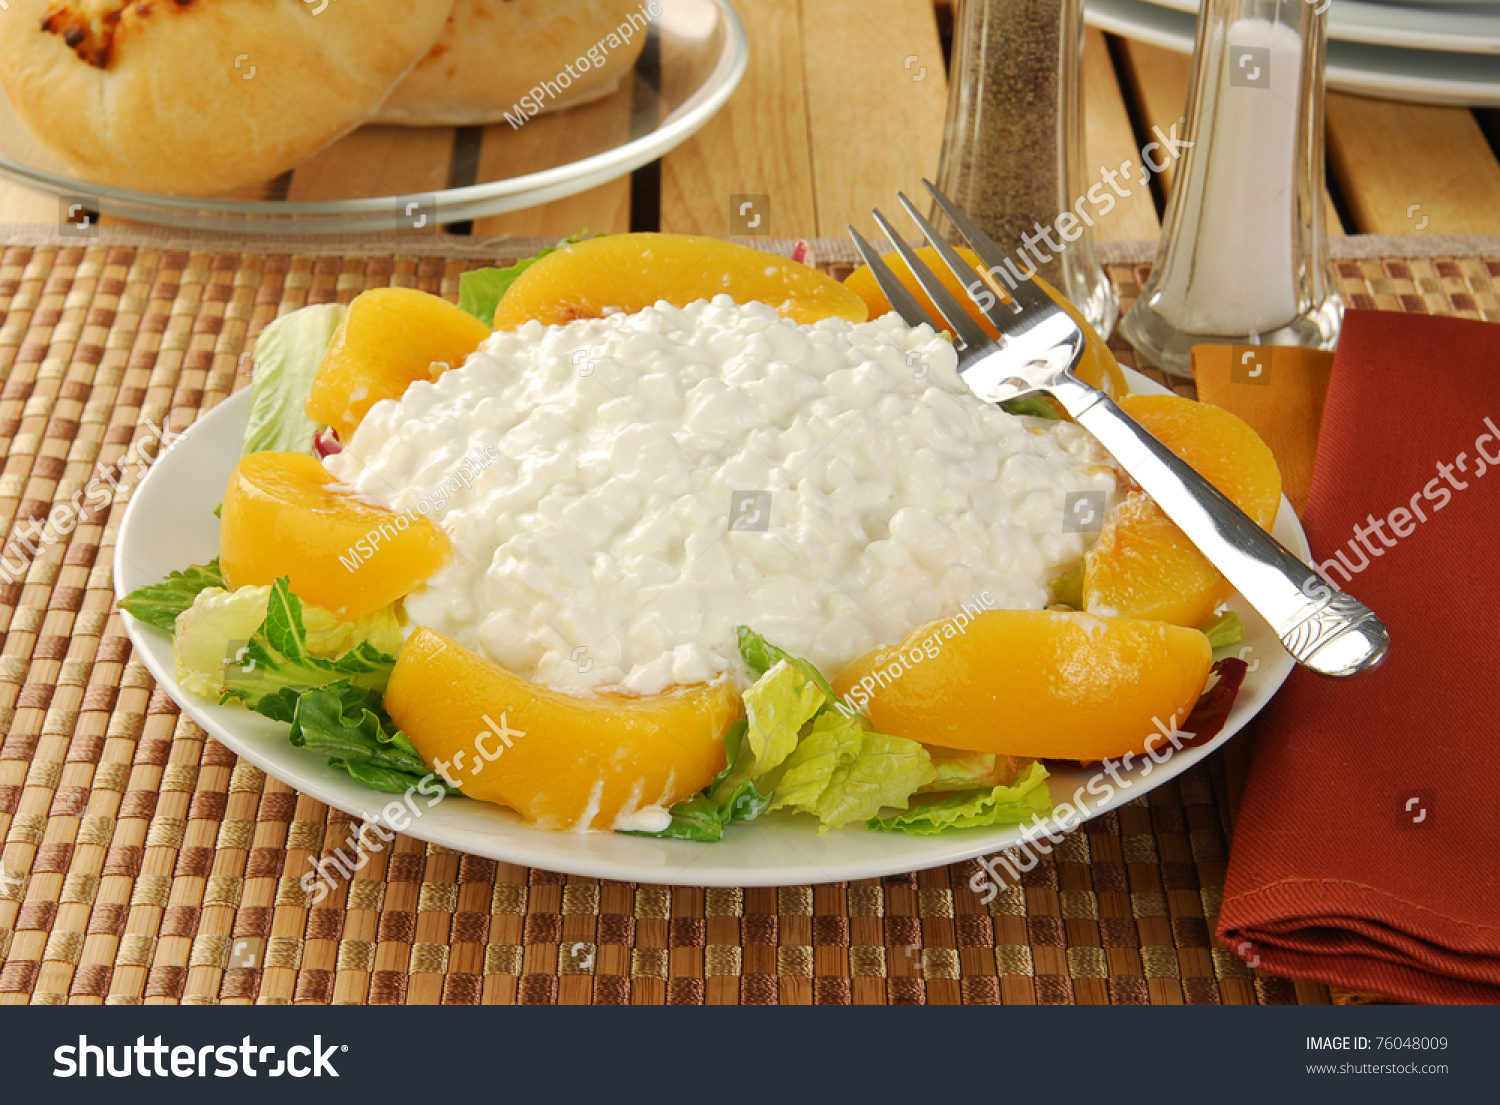 Plate Cottage Cheese Peaches On Bed Stock Photo Edit Now 76048009